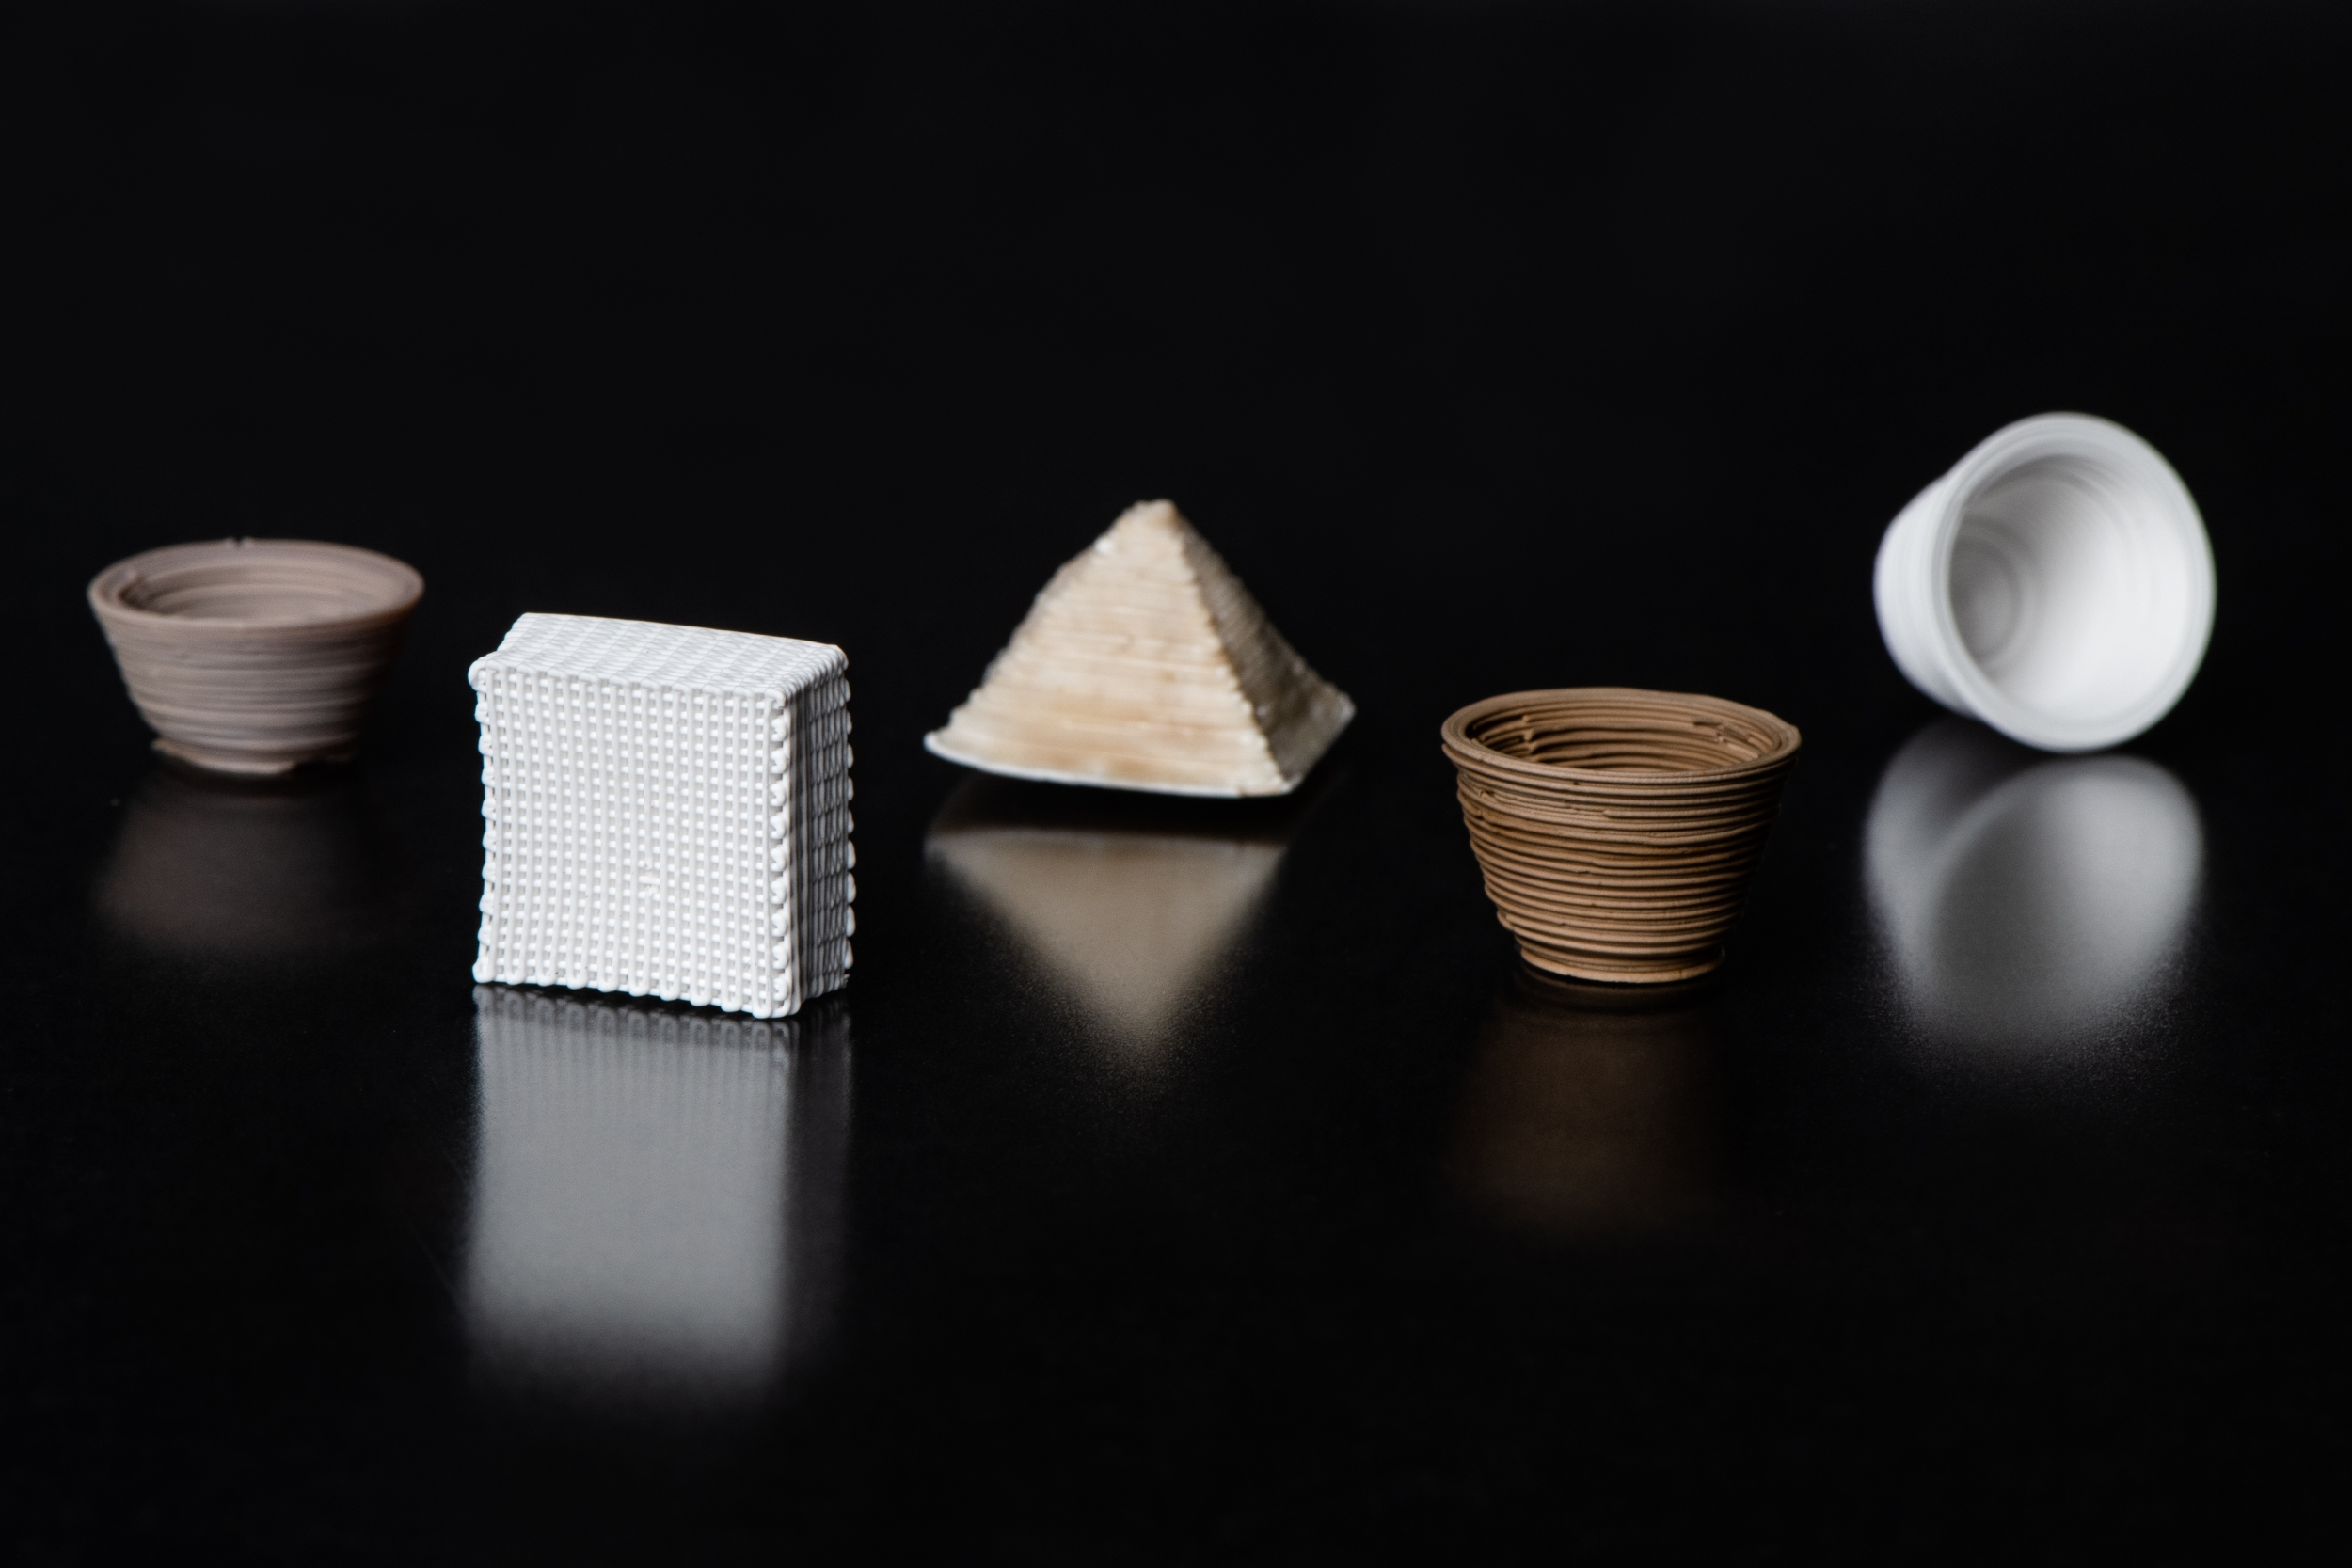 Five small 3D-printed vessels of various colors (white, browns) and shapes (cups, pyramid shapes